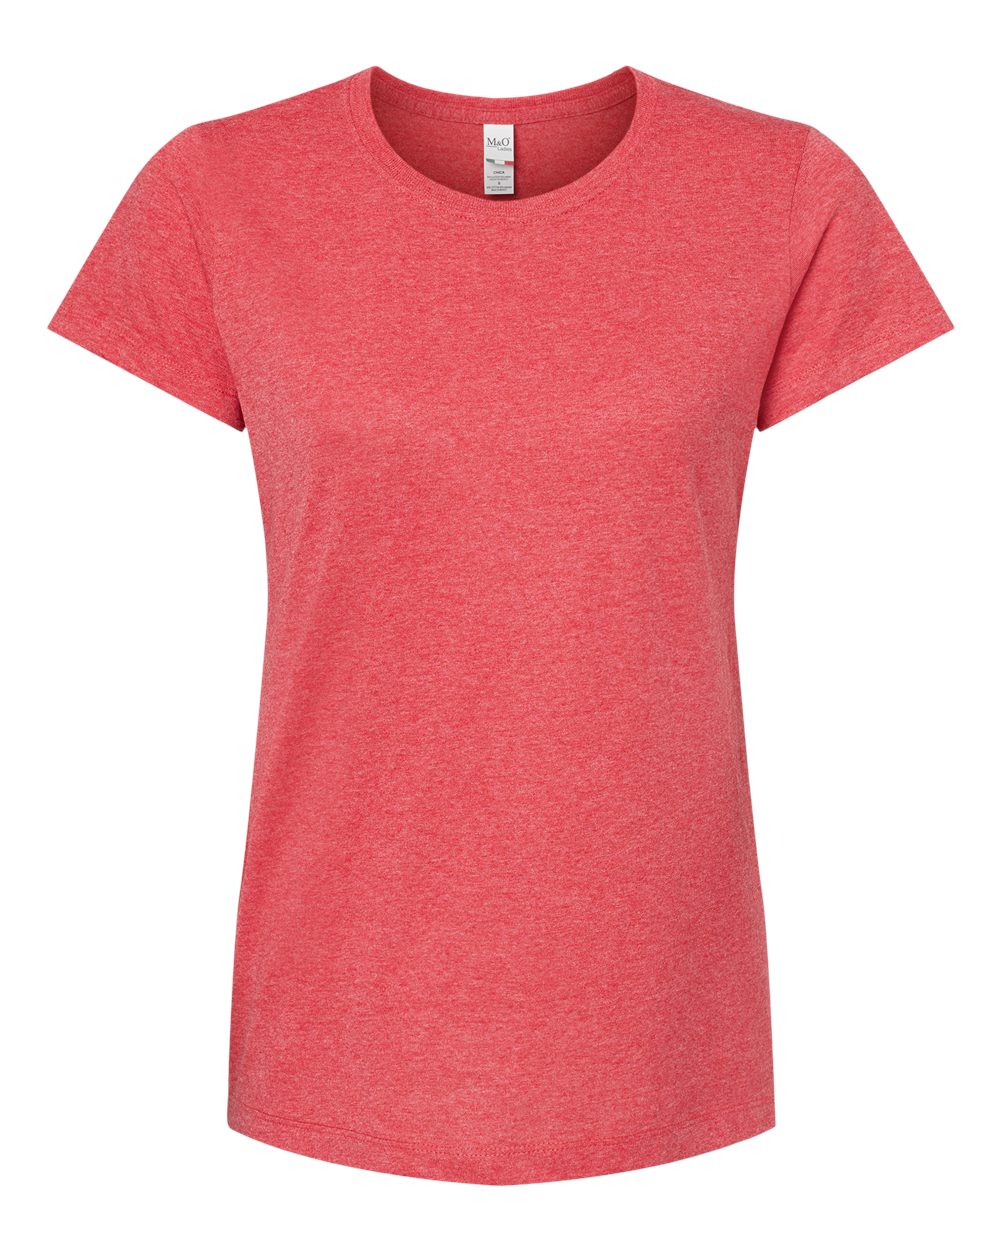 https://xpromo.ca/wp-content/uploads/2023/04/MO_4810_Heather_Red_Front_High.jpg